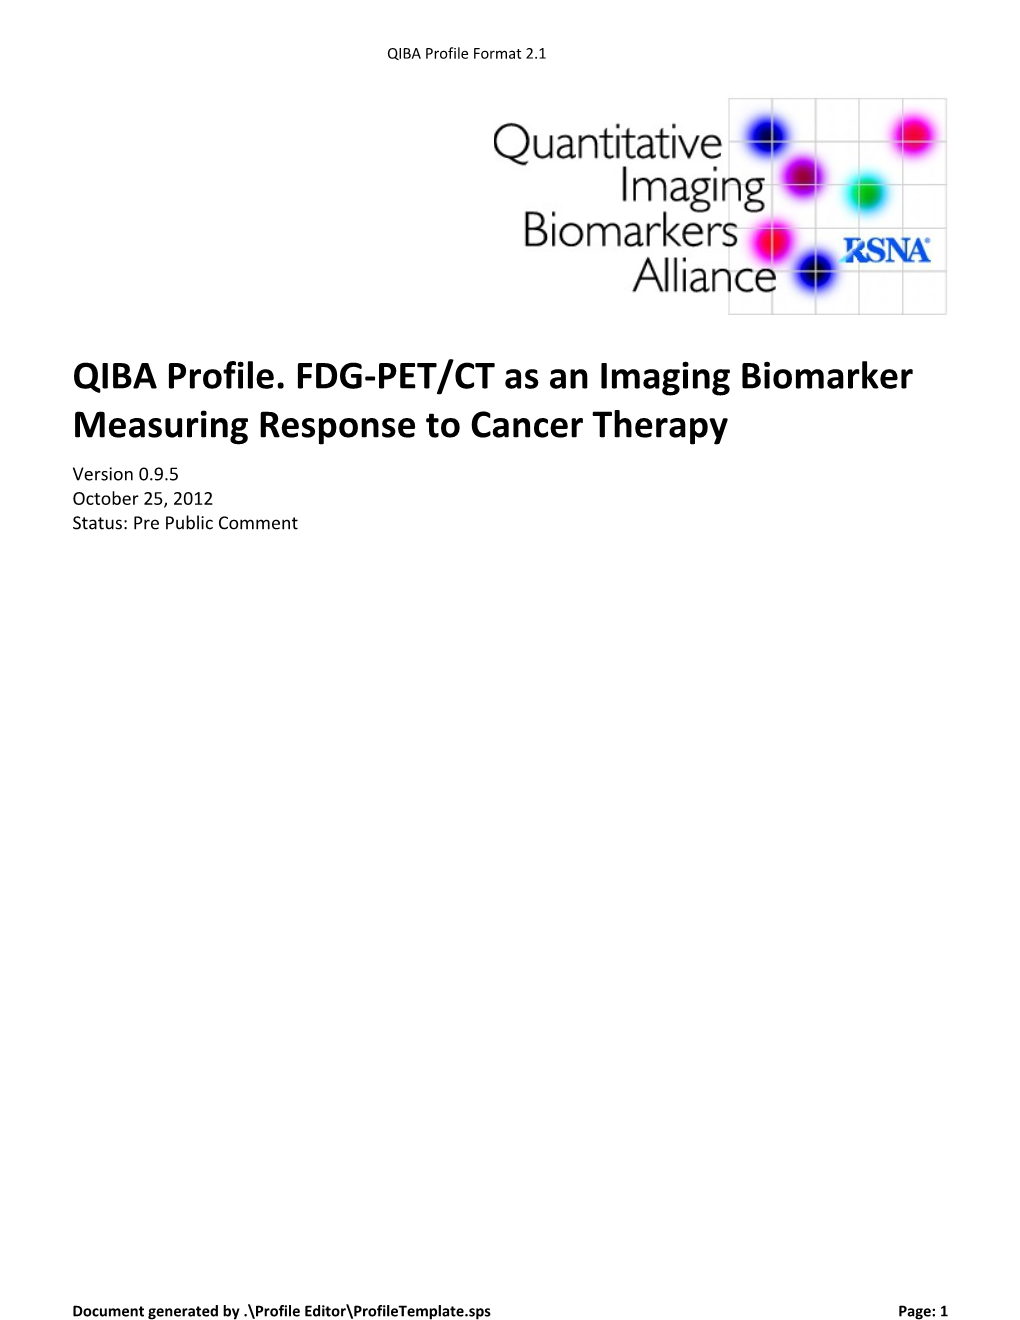 QIBA Profile. FDG-PET/CT As an Imaging Biomarker Measuring Response to Cancer Therapy